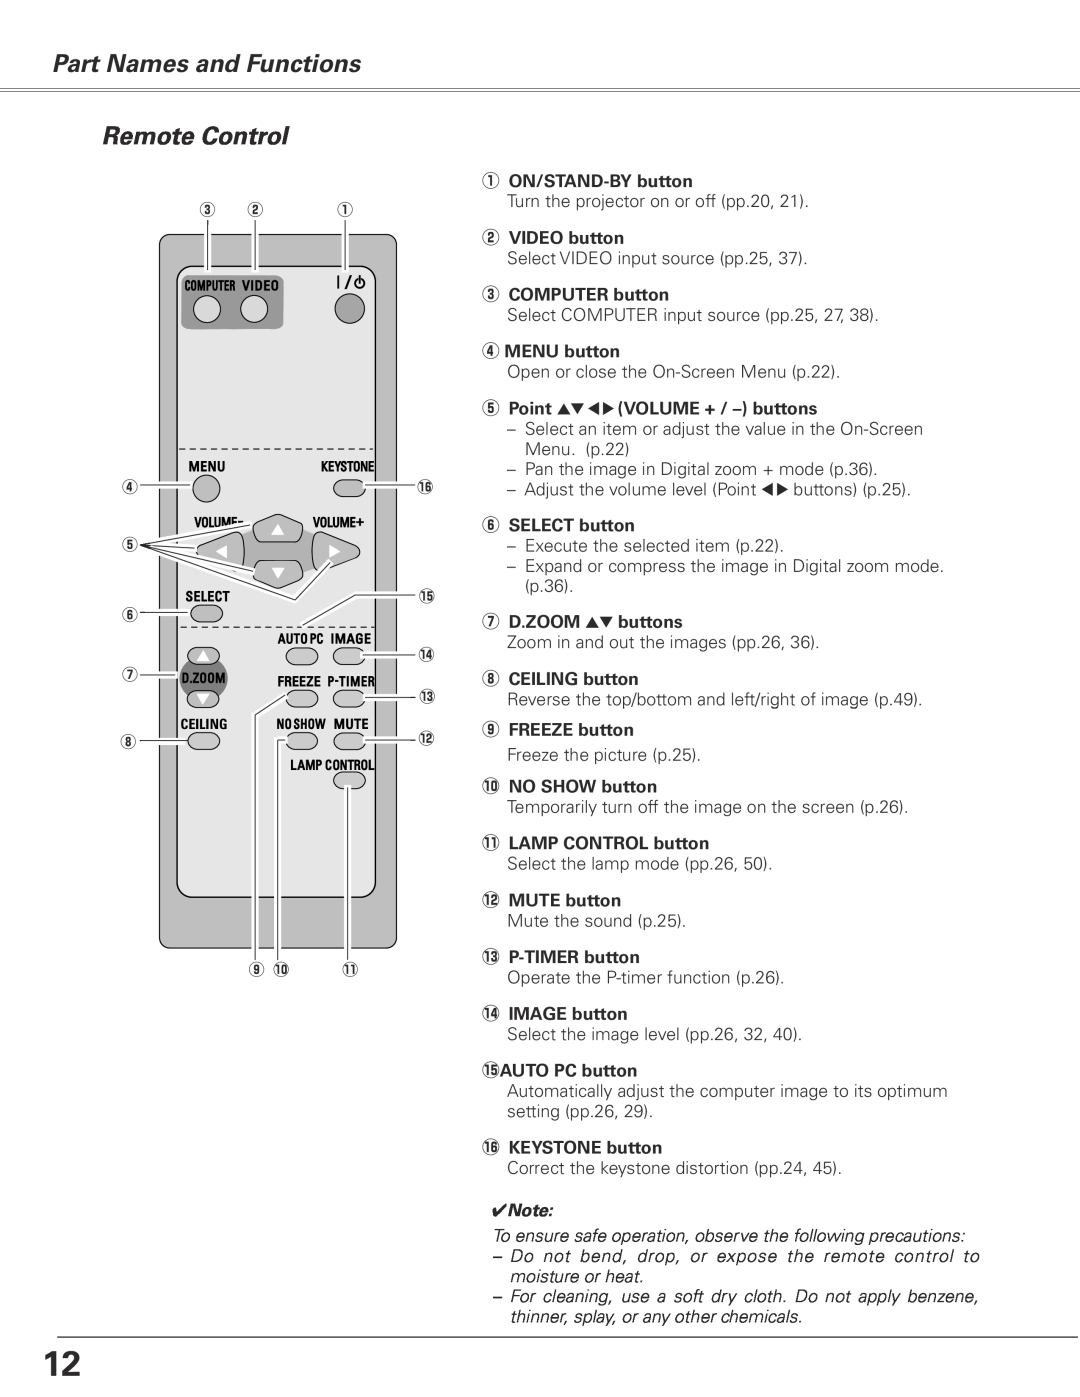 Sanyo PLC-XL50A owner manual Remote Control, Part Names and Functions, qON/STAND-BYbutton, wVIDEO button, e COMPUTER button 